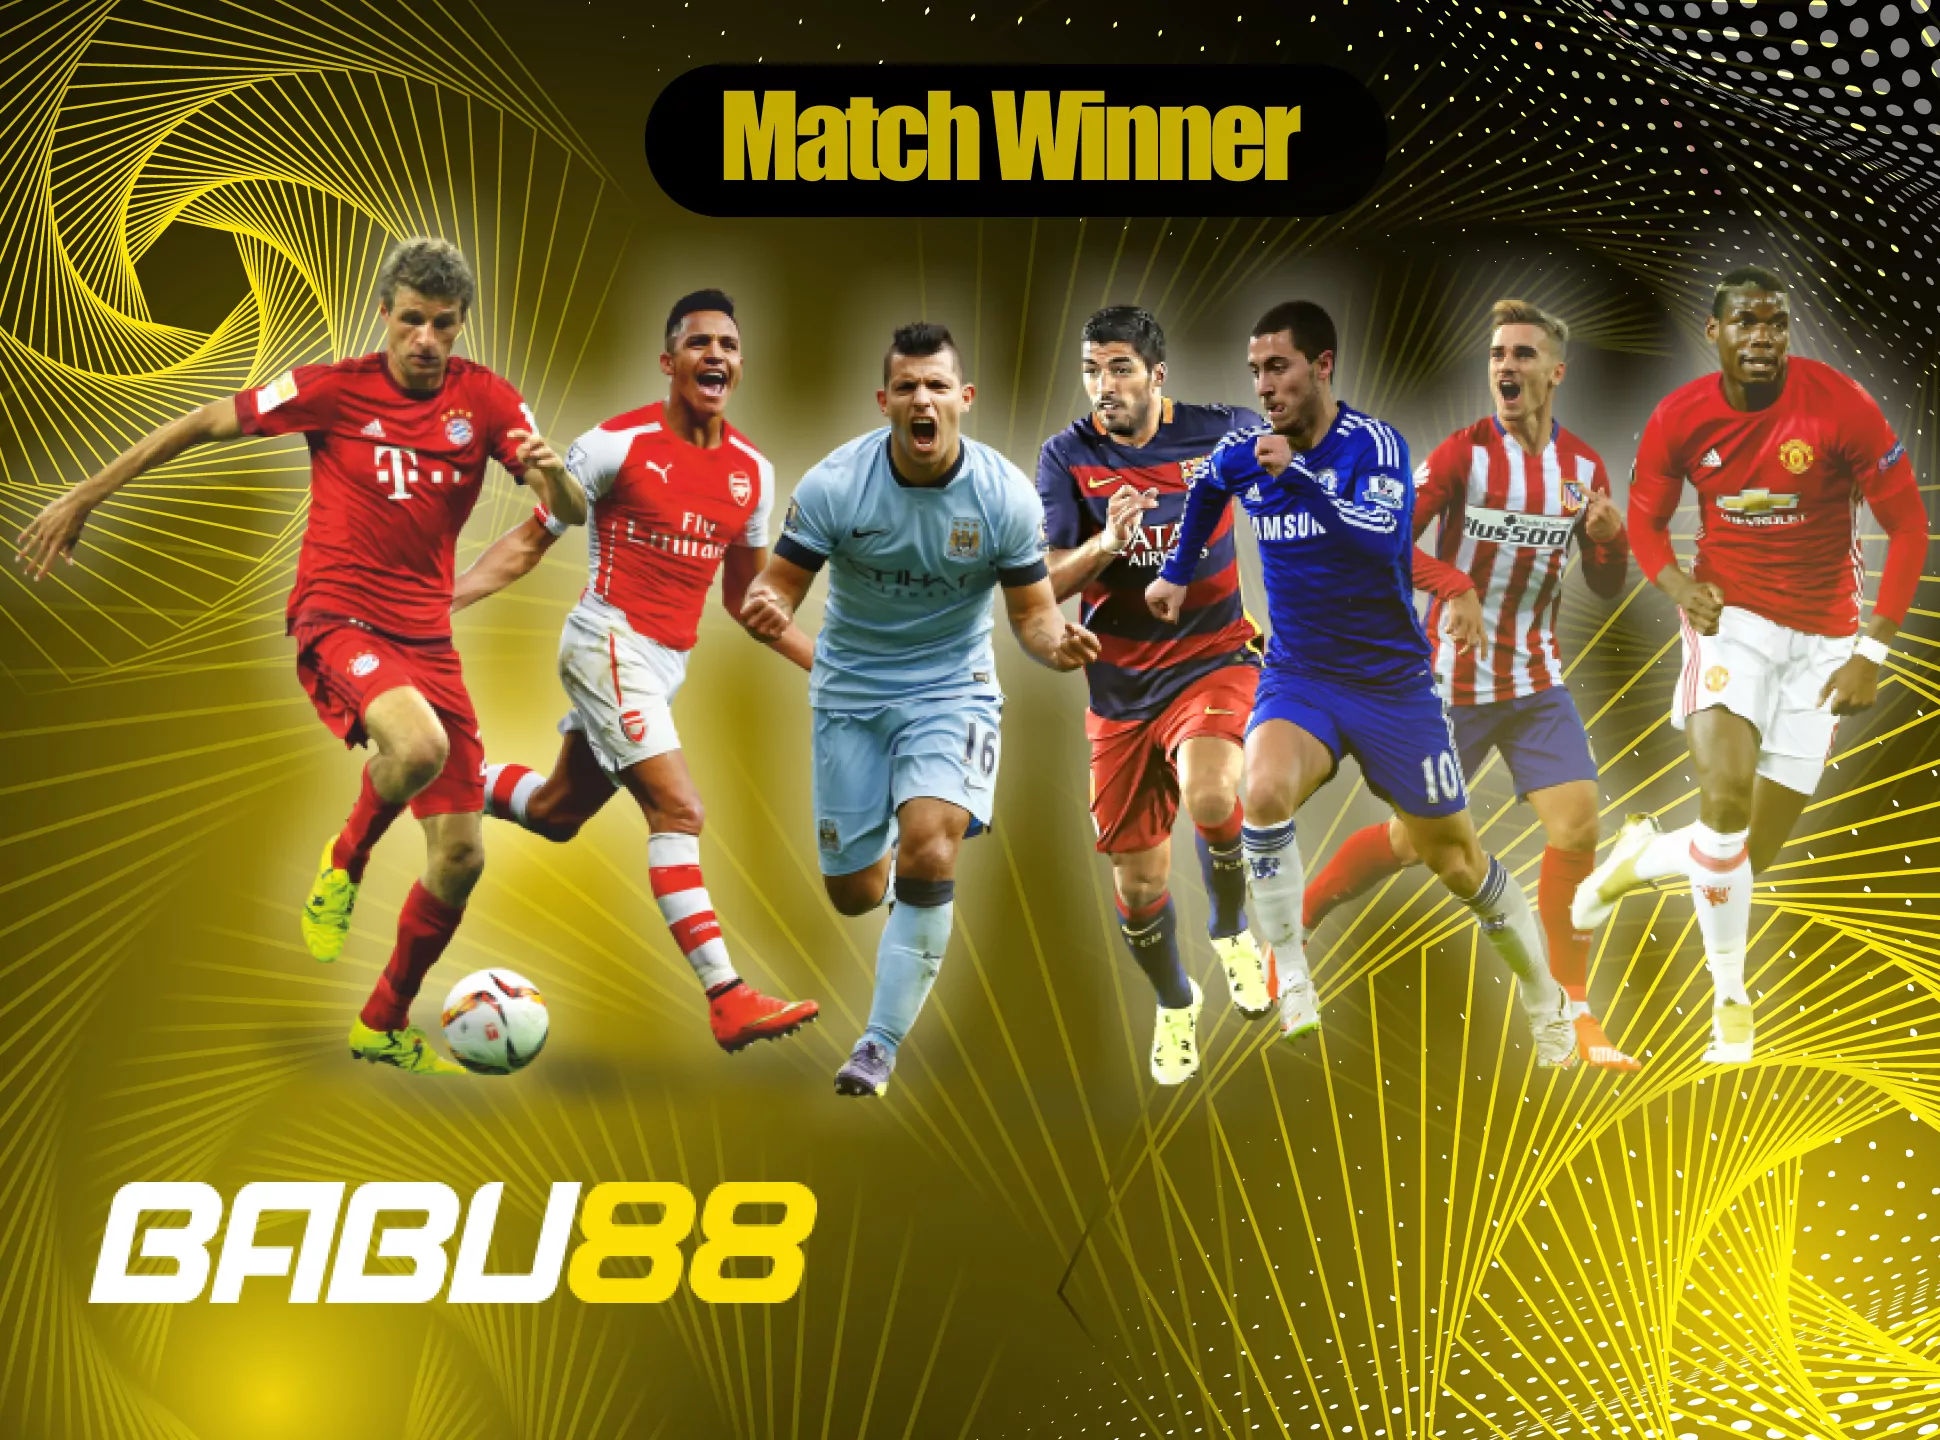 Choose the winner of the match and place a bet on him.